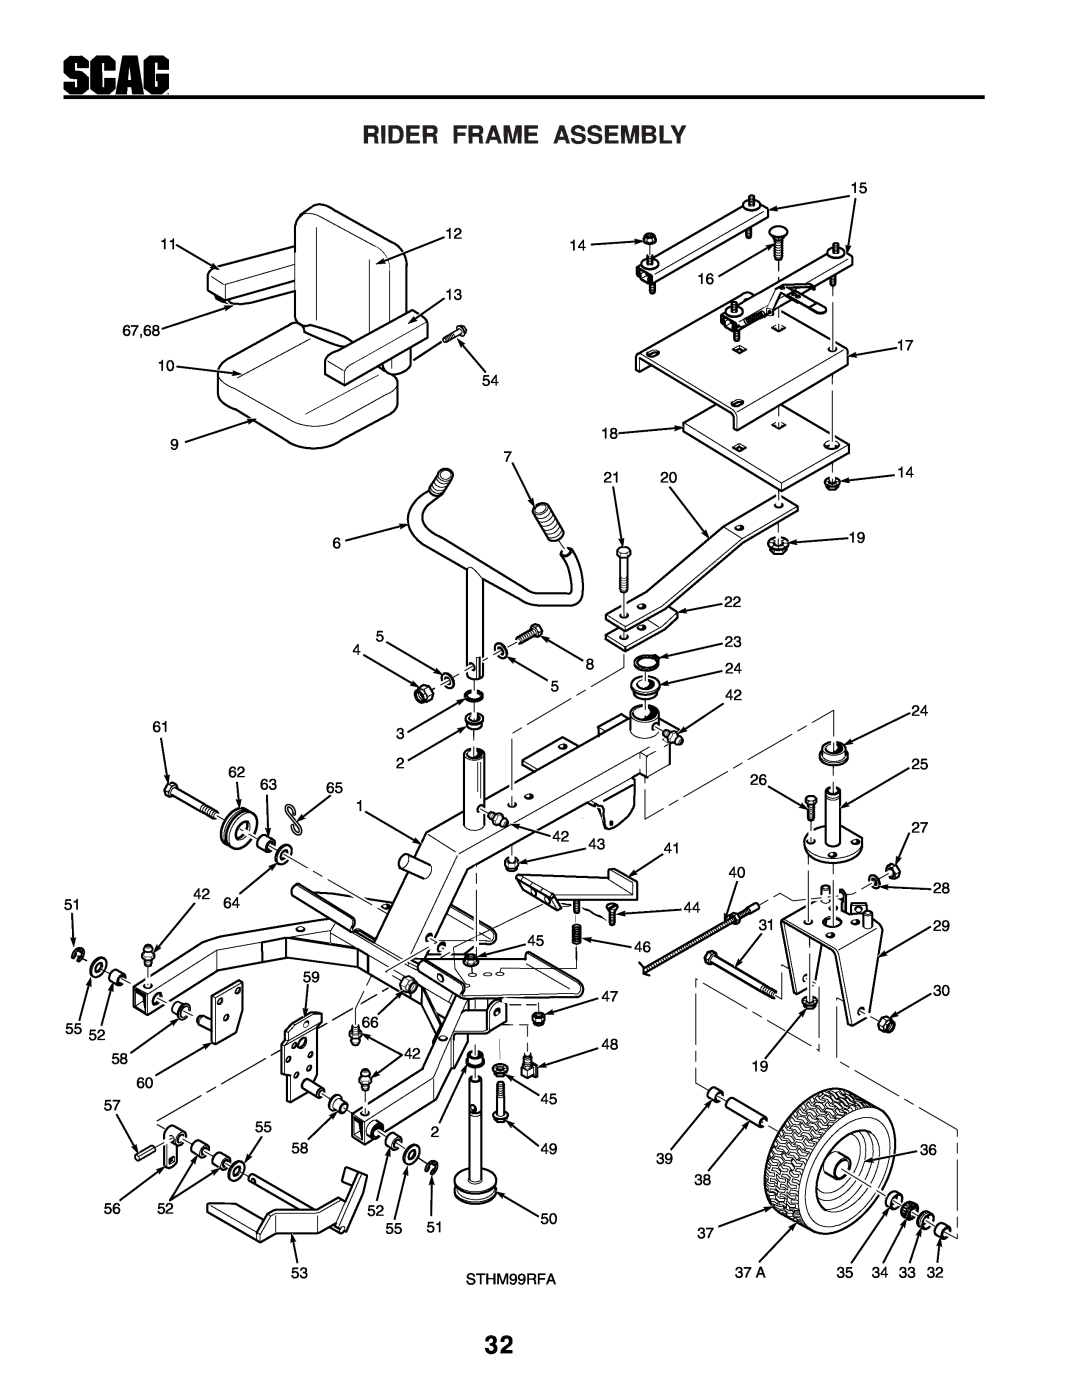 Scag Power Equipment STHM manual Rider Frame Assembly 